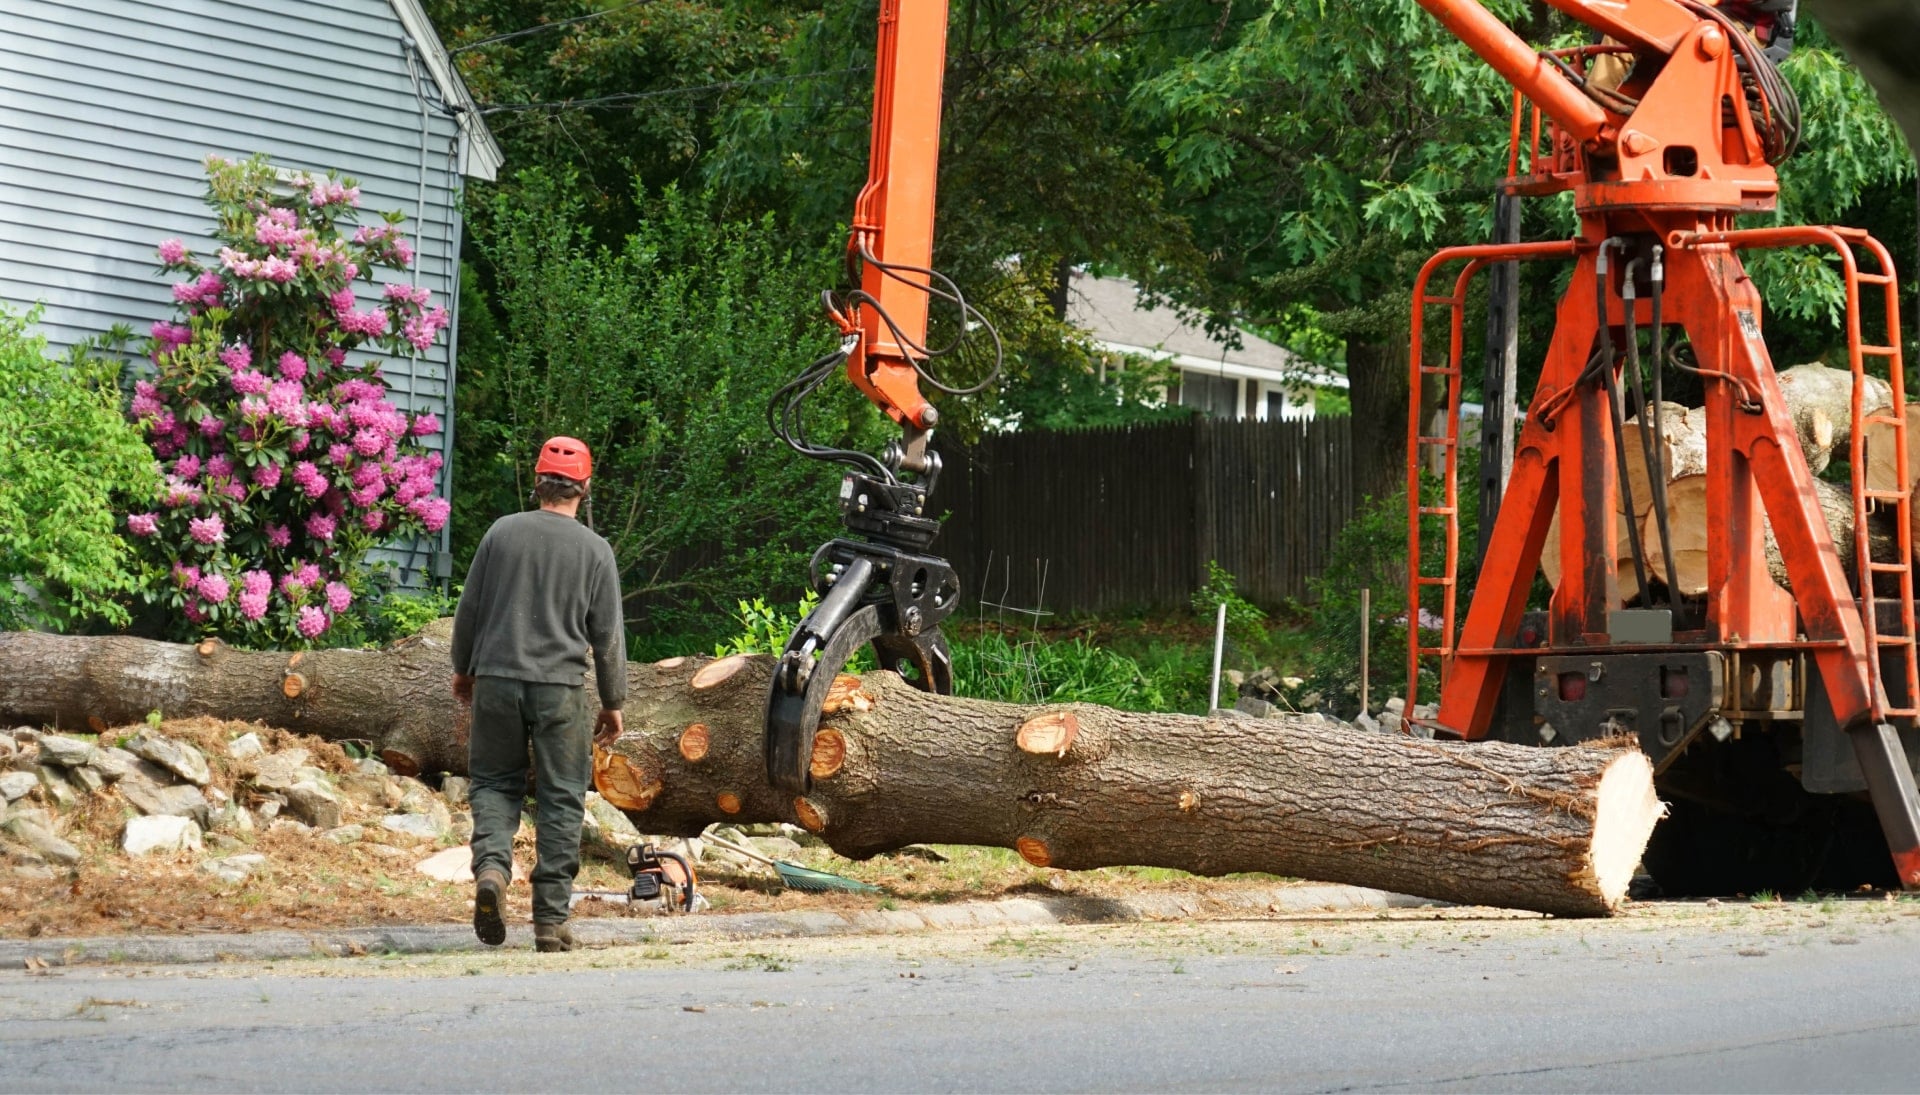 A tree stump has fallen and needs tree removal services in El Paso, TX.